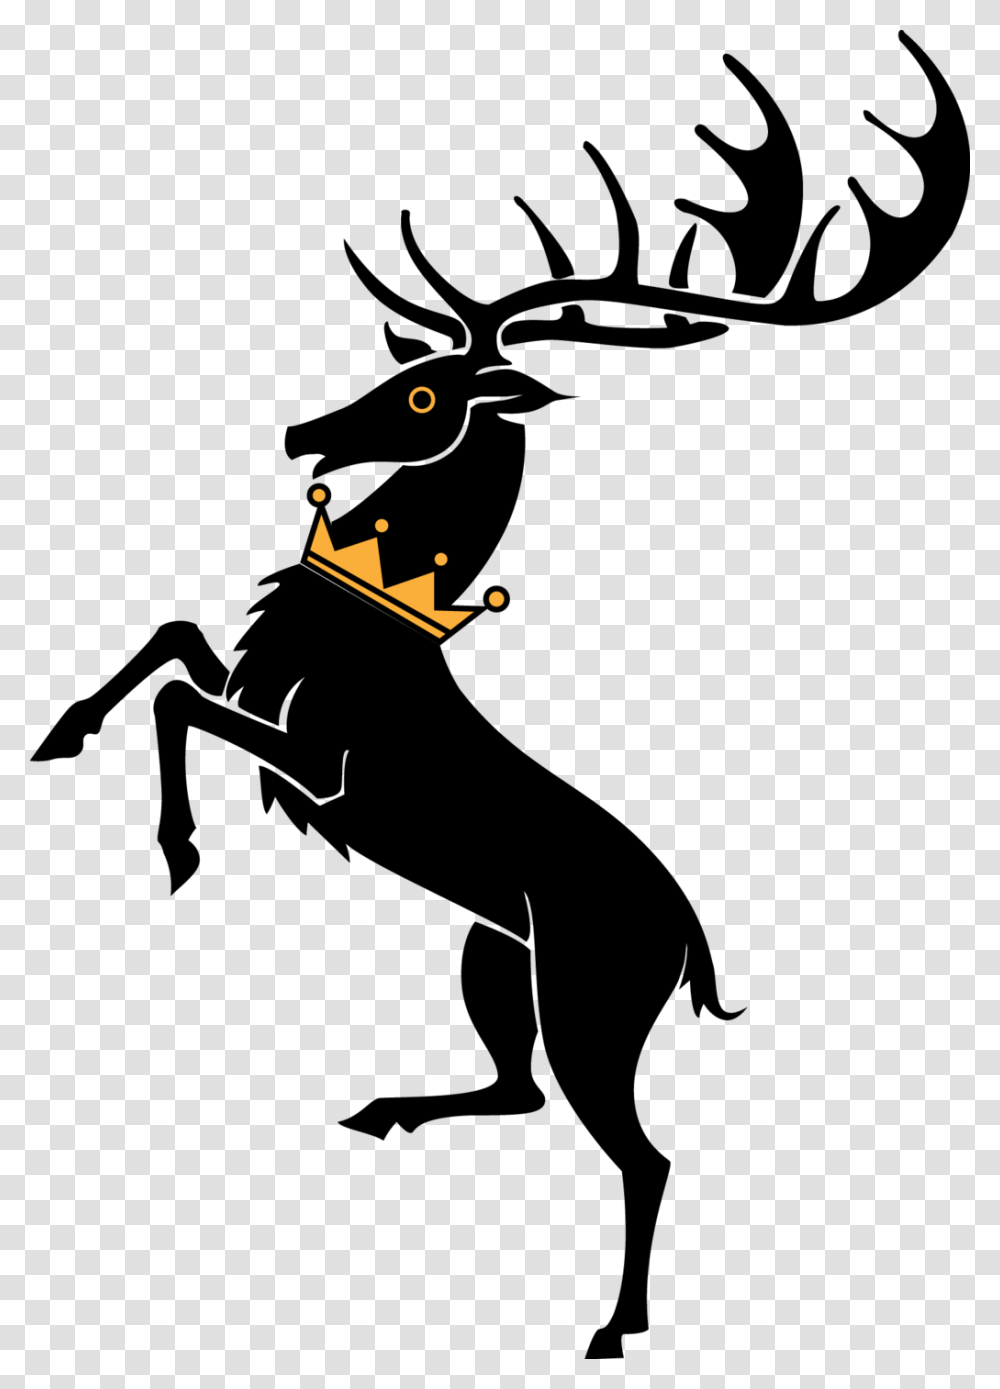 Stag Vector Reindeer Game Of Thrones Baratheon Sigil, Airplane, Aircraft, Vehicle, Transportation Transparent Png